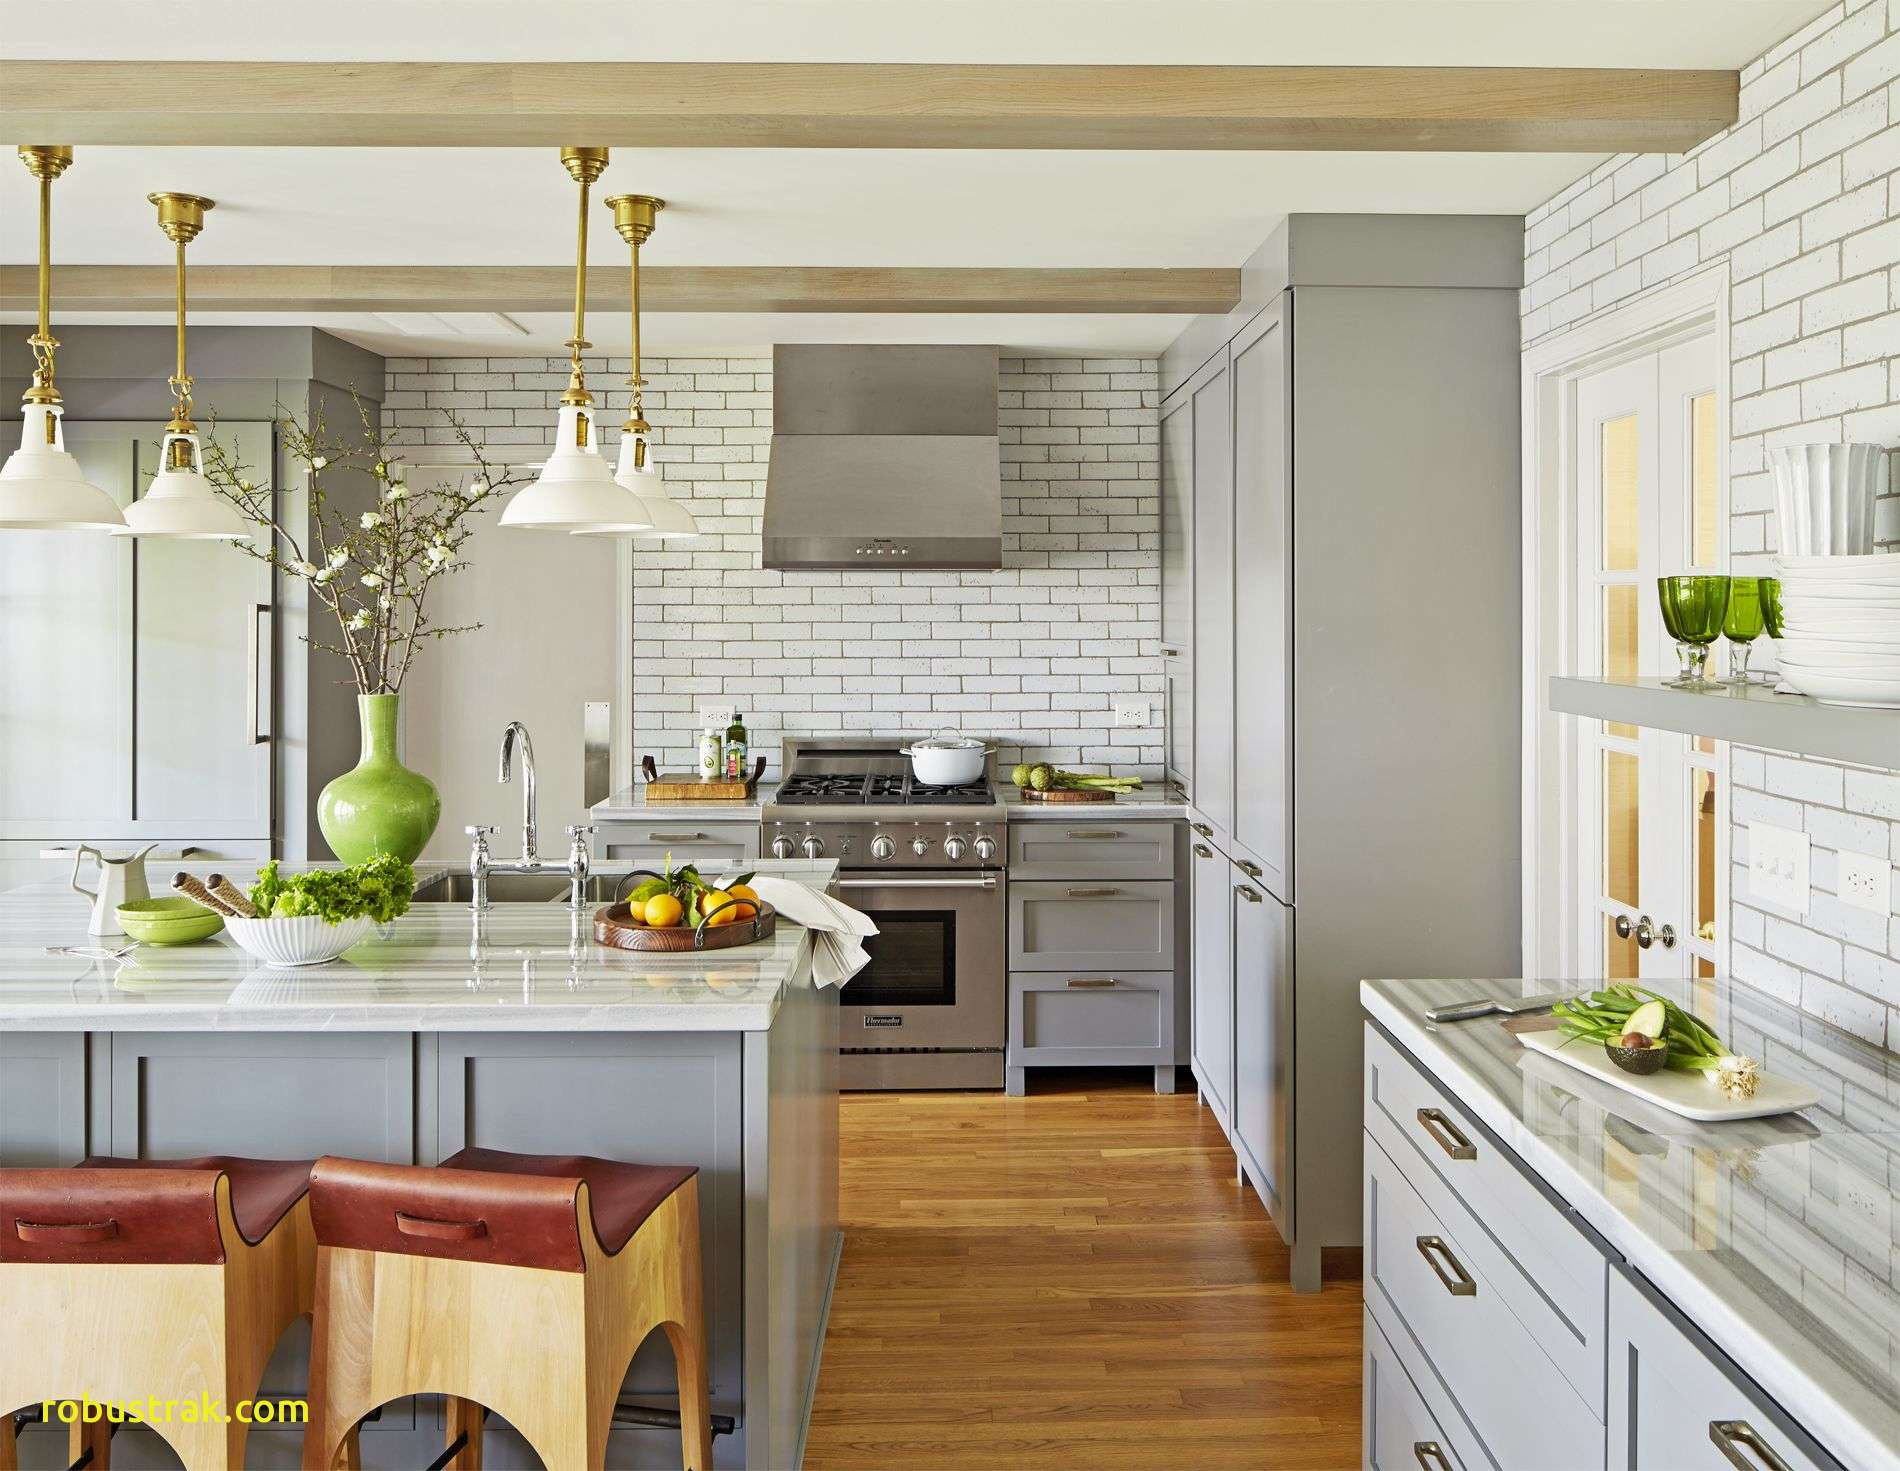 grey hardwood floors houzz of new white kitchens houzz home design ideas in 8 gorgeous kitchen trends that are going to be huge in 2018